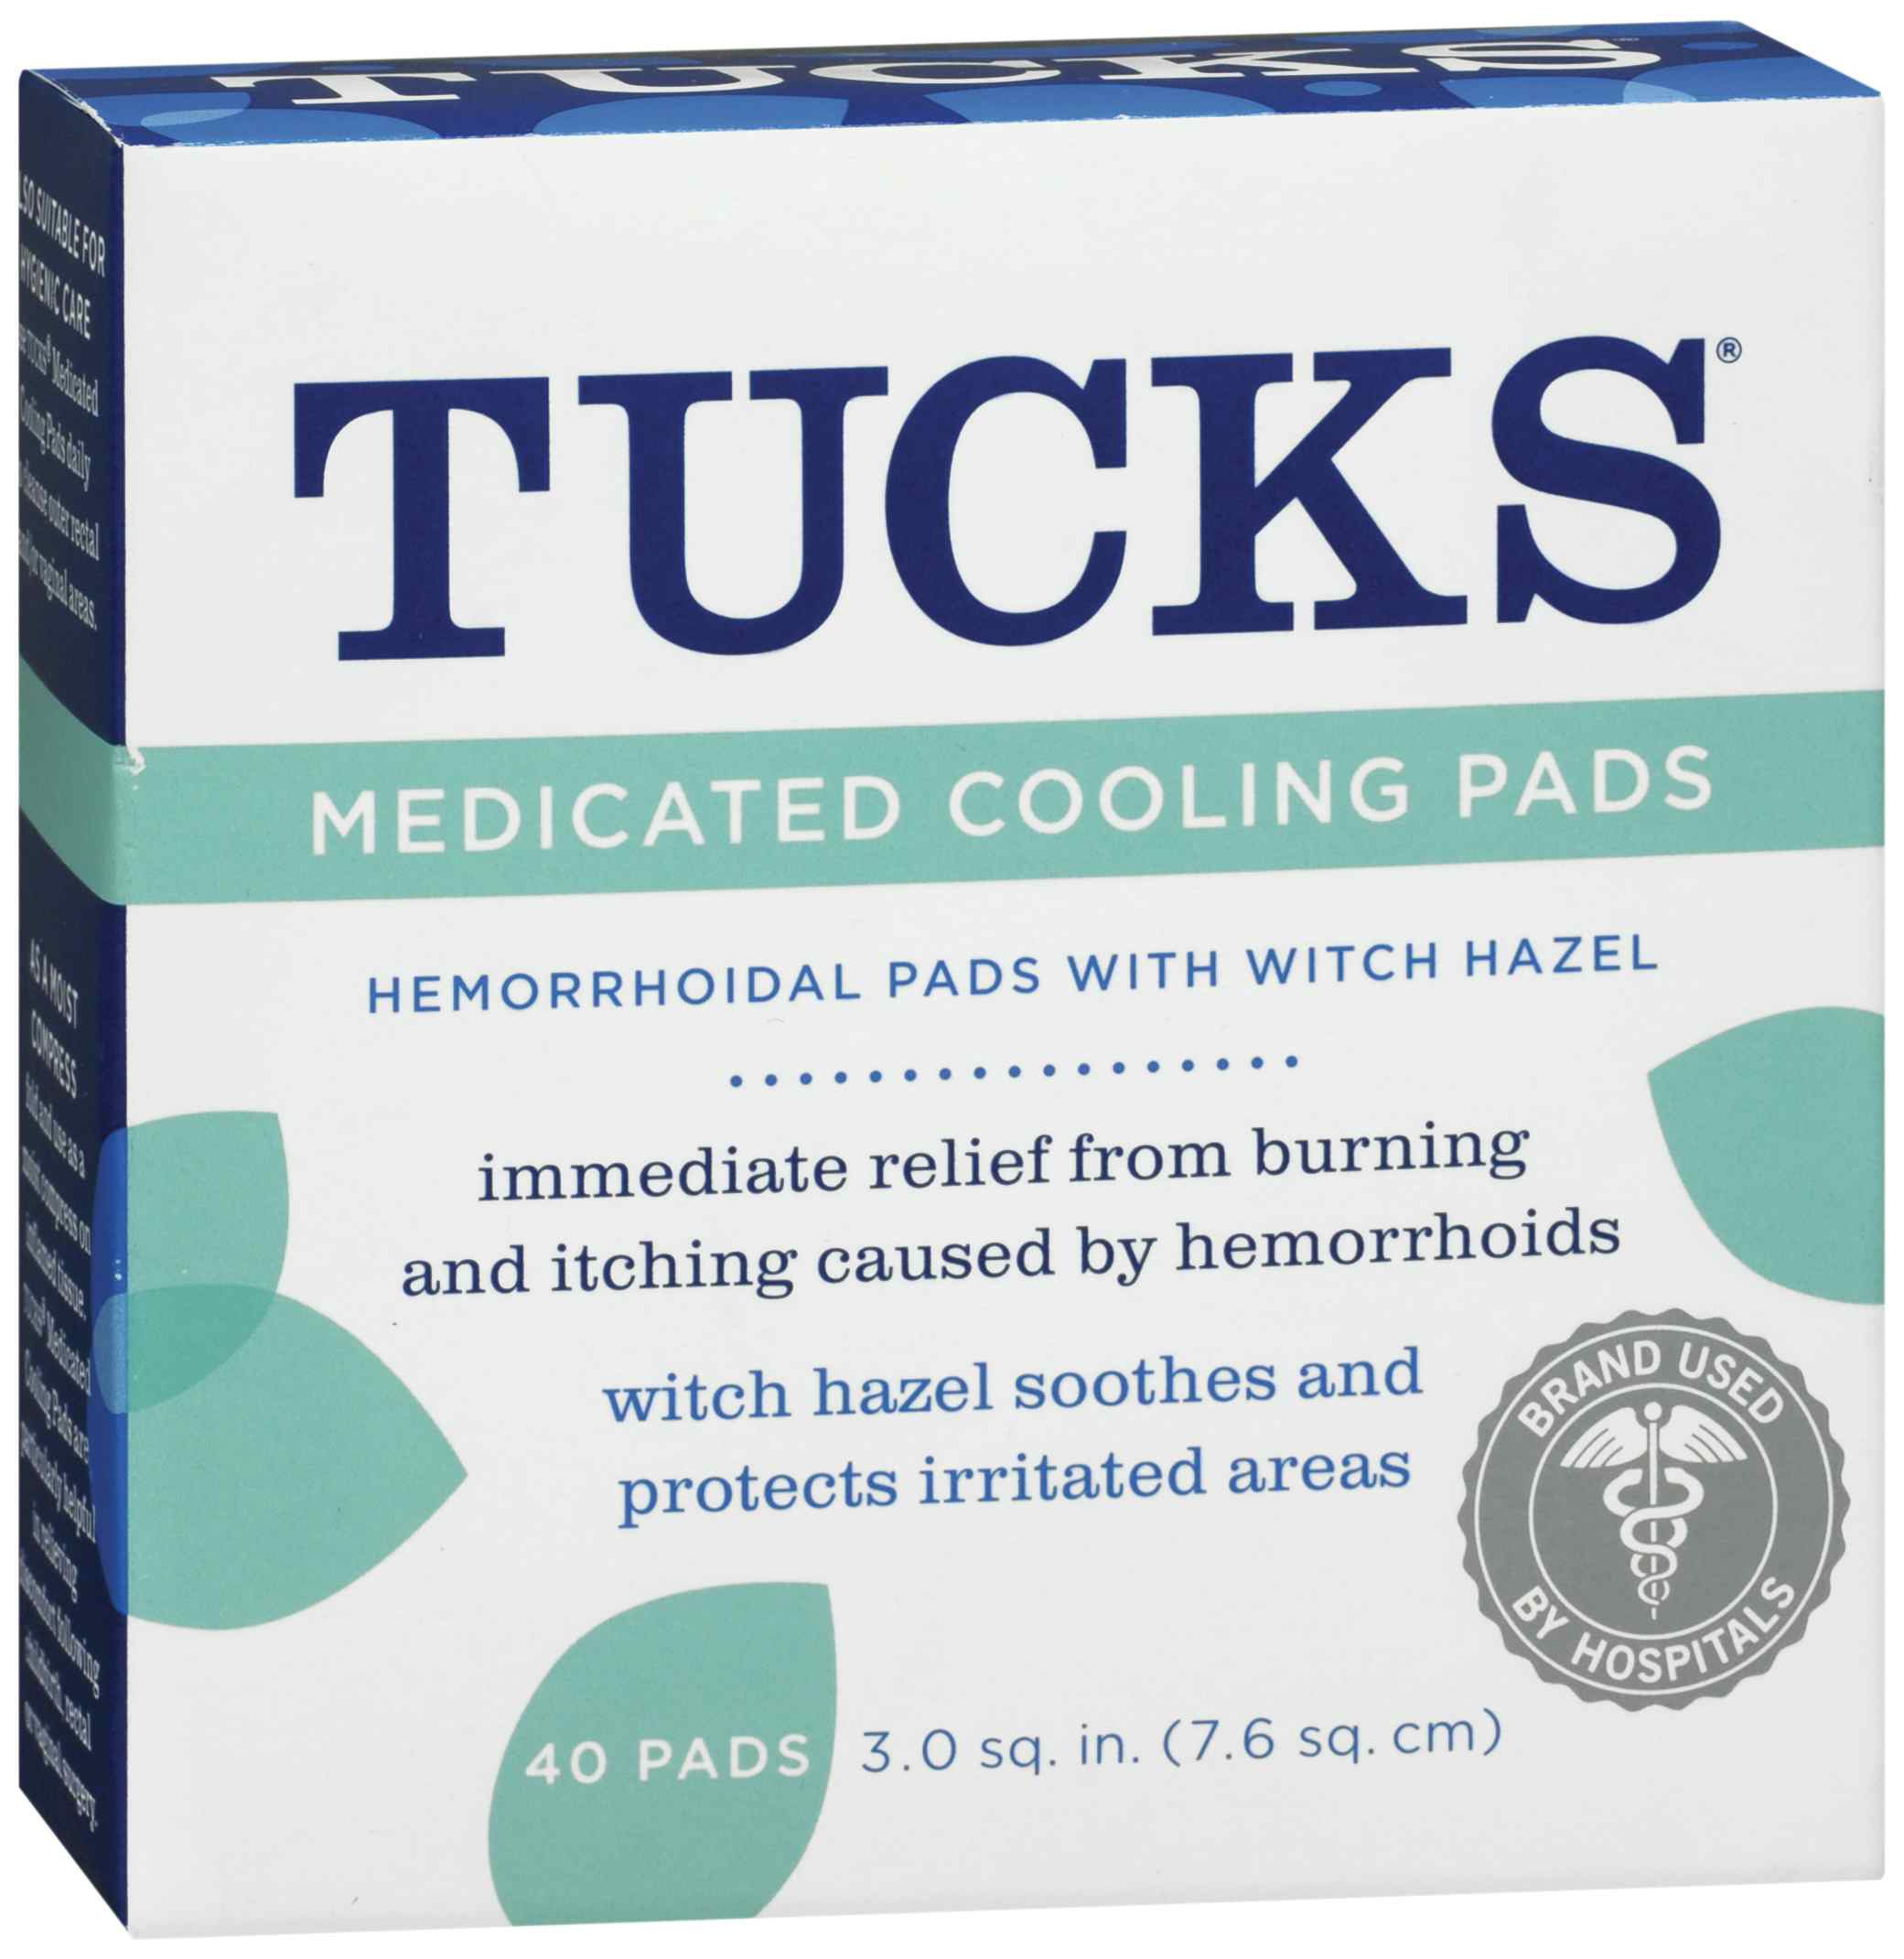 Tucks Medicated Cooling Hemorroidal Pads with Witch Hazel, 041388520414, Box of 40